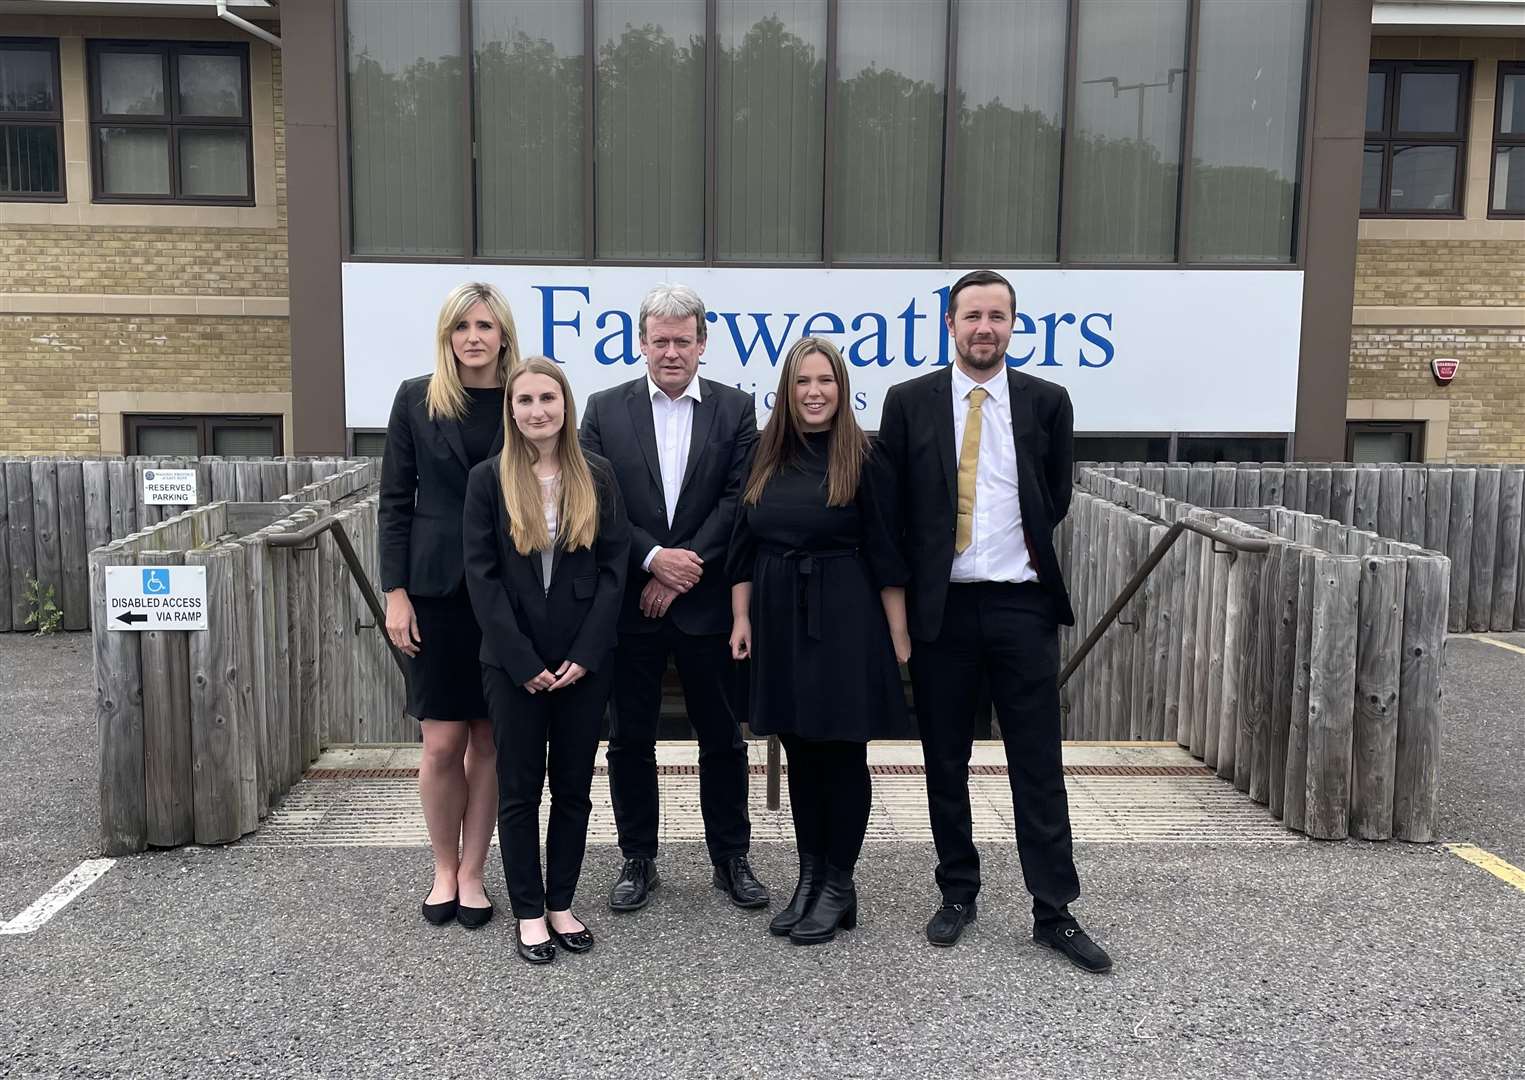 Rachel Higgs and Andrew Batten with the legal team from Fairweathers (57242698)